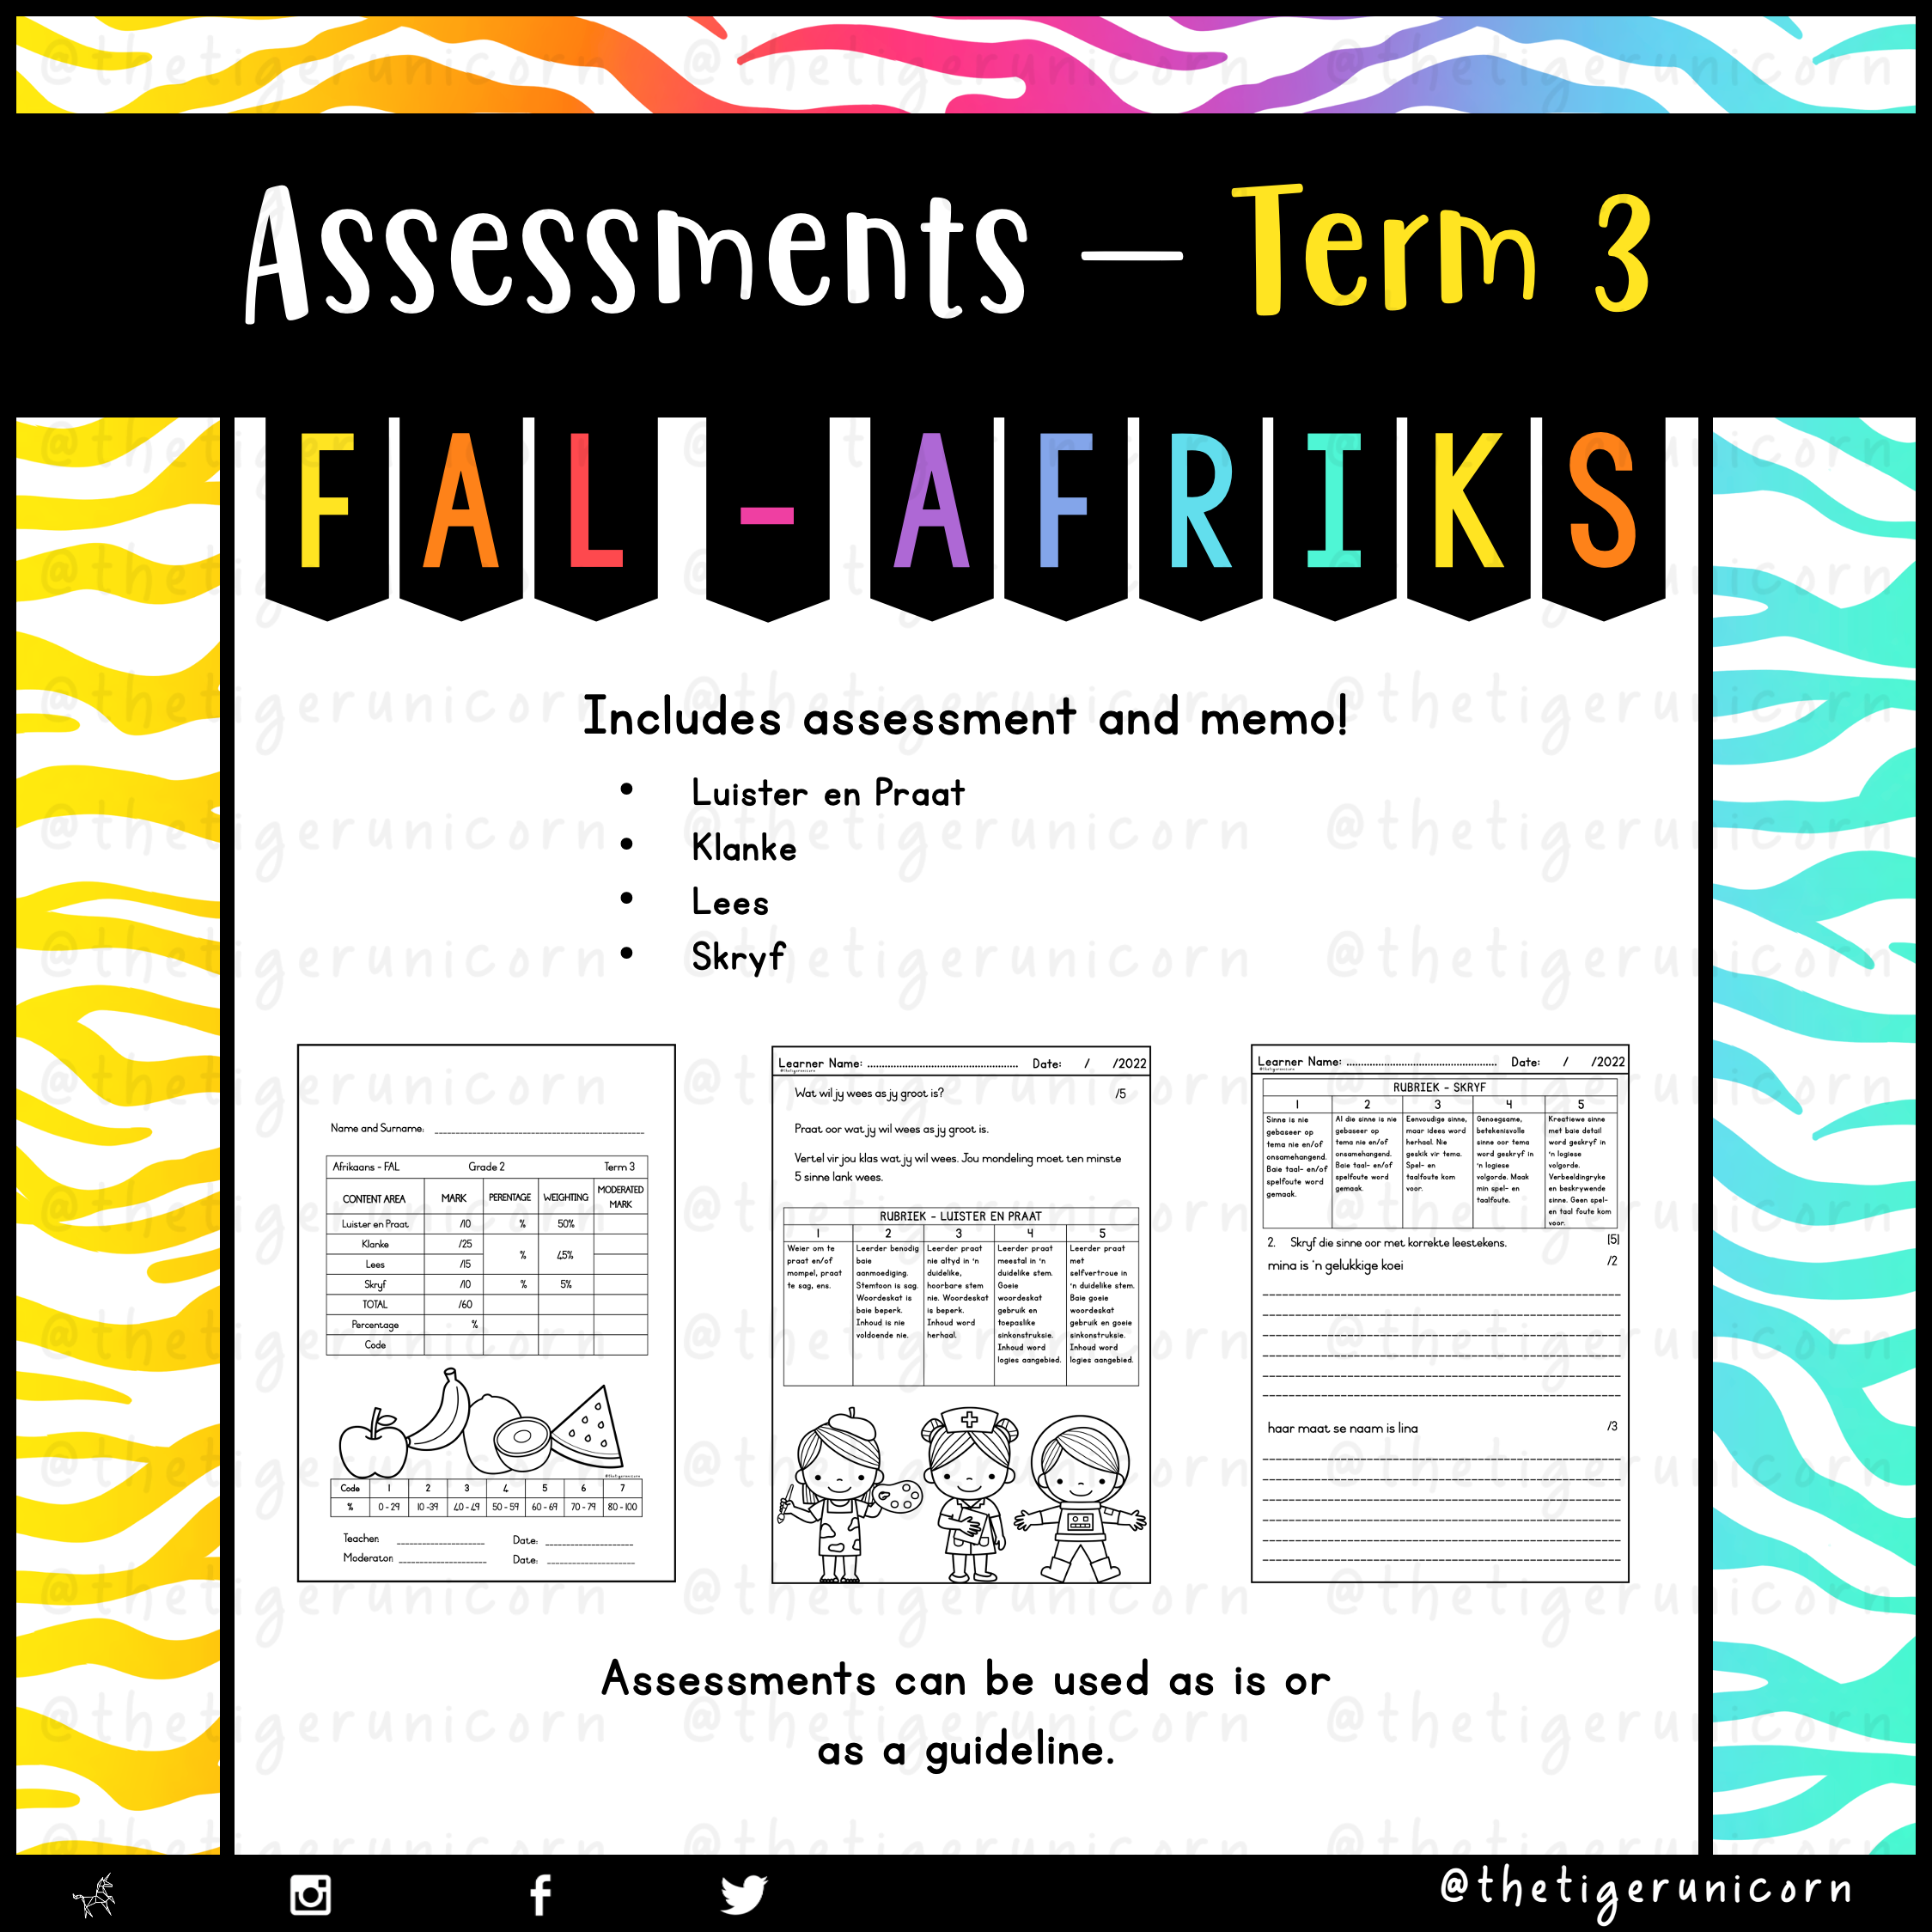 grade-2-assessment-afrikaans-first-additional-language-term-3-with